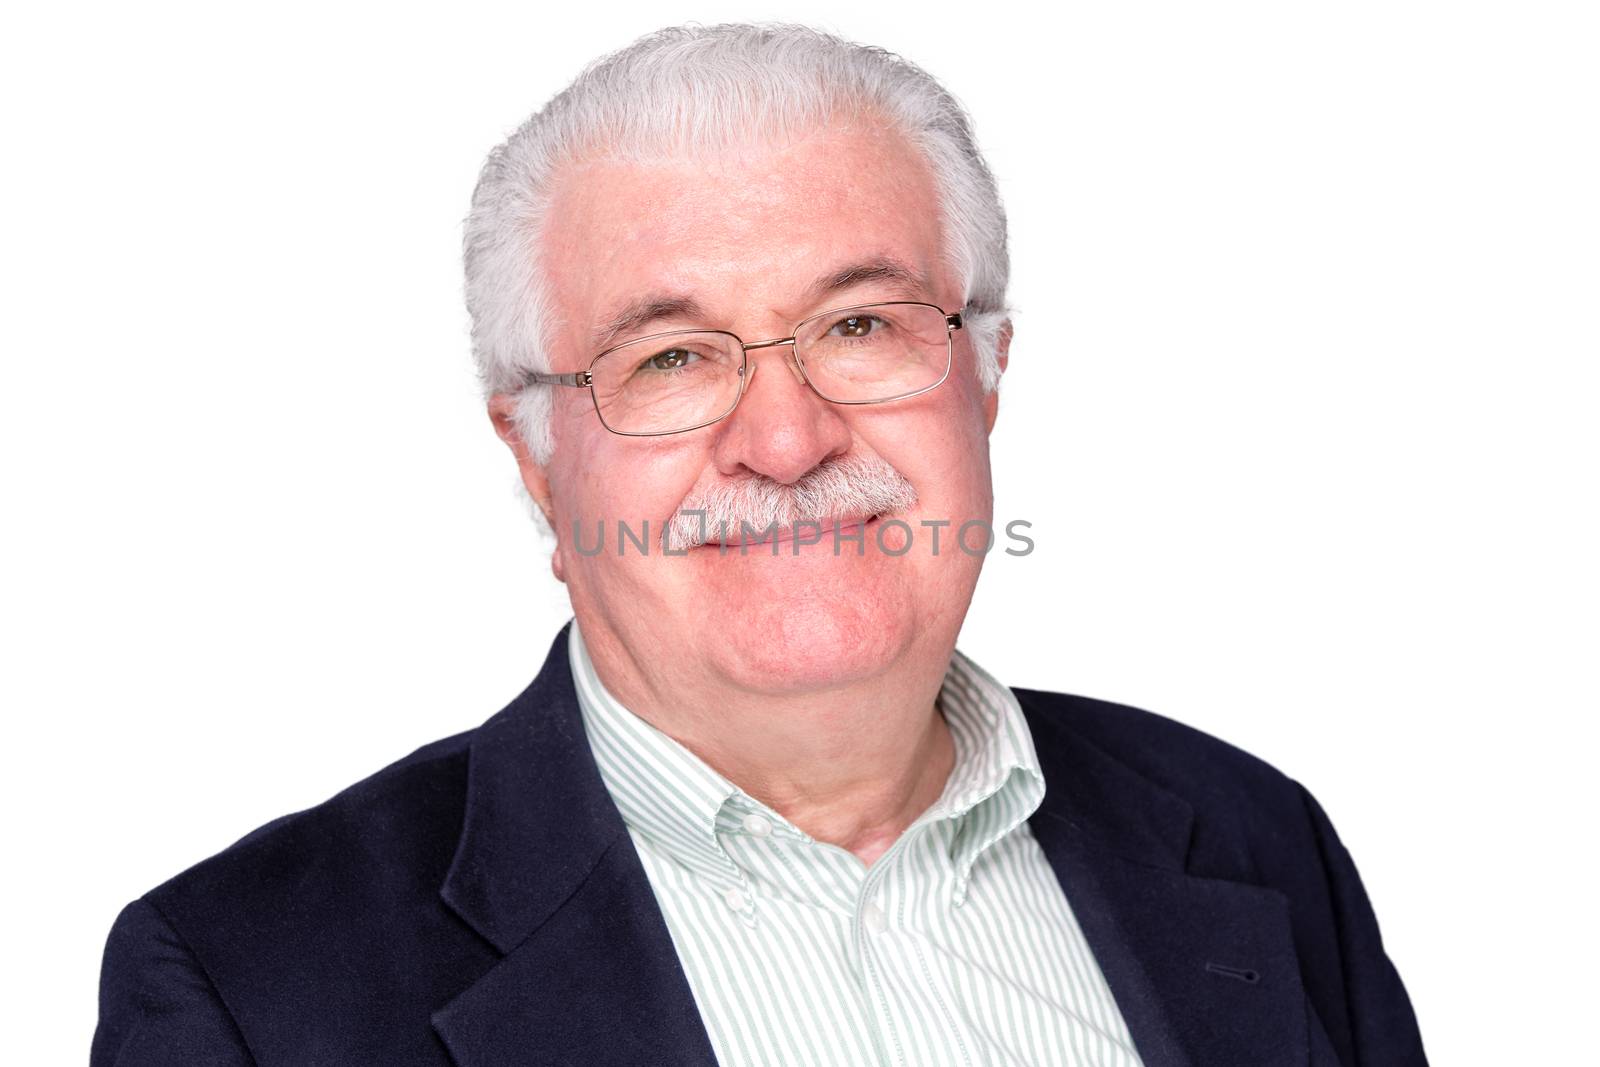 Close up Middle Age Man Wearing Business Suit and Eyeglasses Smiling at the Camera, Isolated on White Background.